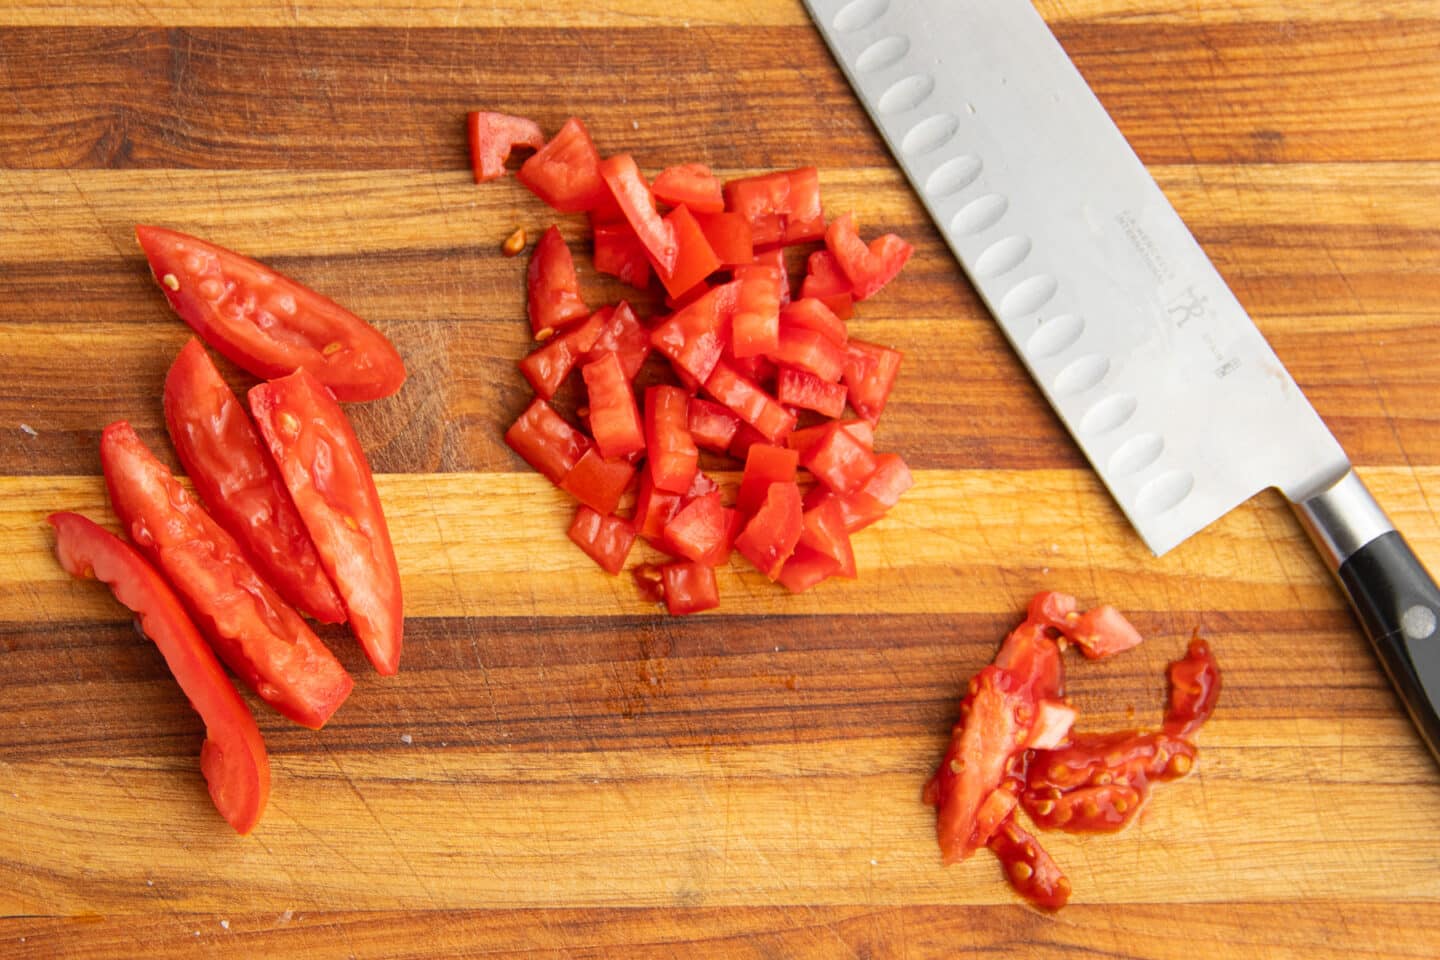 This is a picture of a cutting board and diced tomatoes with a knife. 